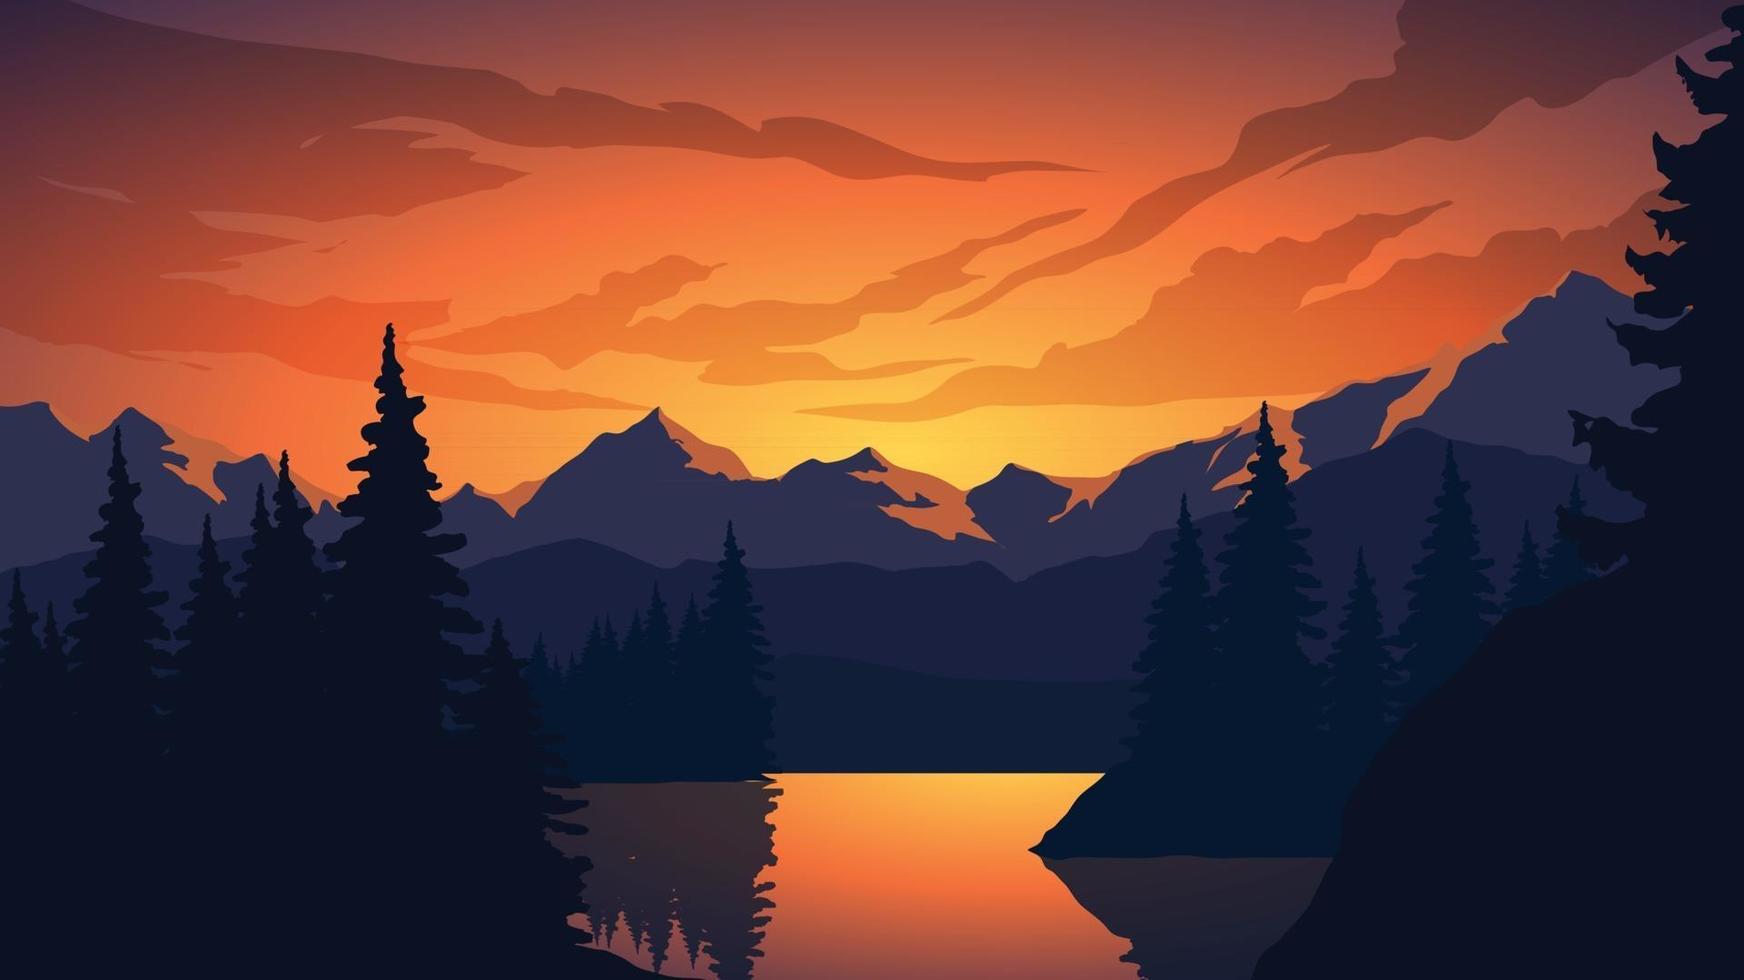 Sunset Landscape Illustration With Mountain And Pine Forest vector